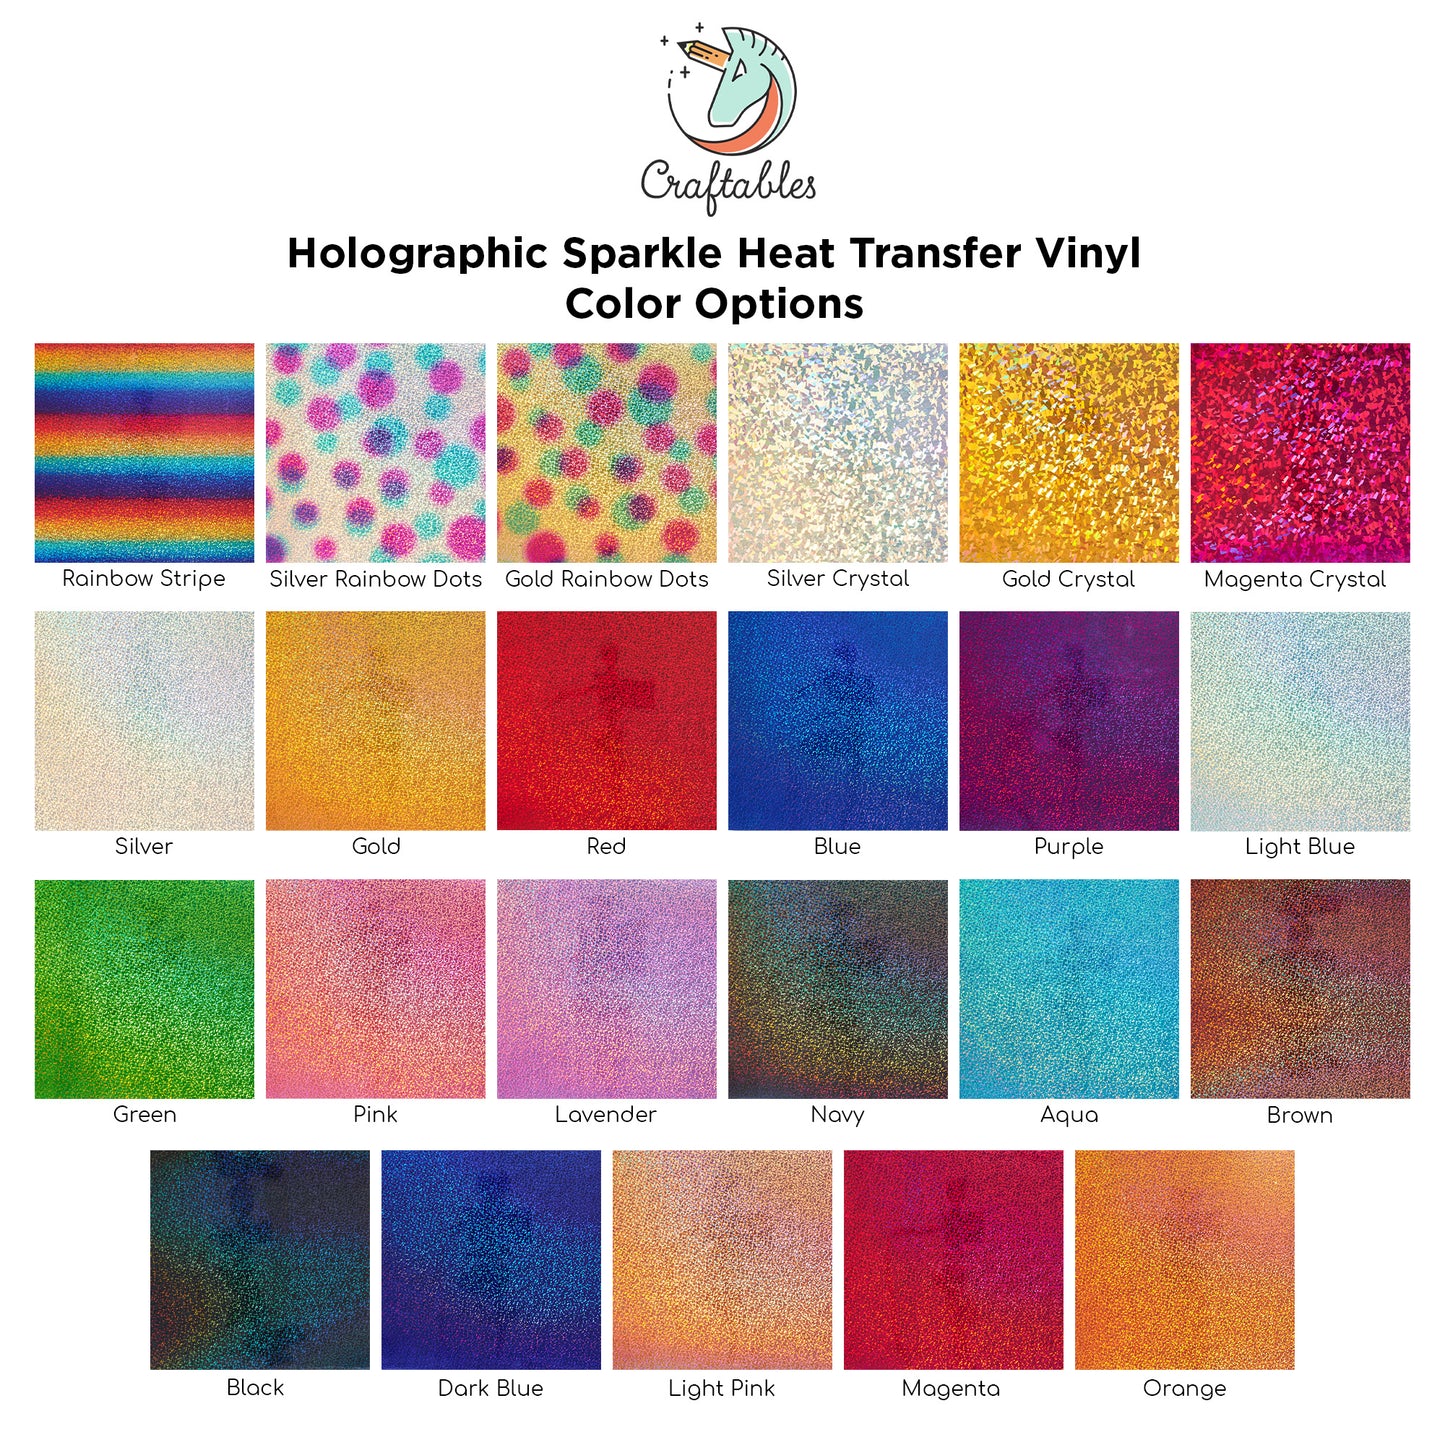 Silver Holographic Sparkle Heat Transfer Vinyl Rolls By Craftables